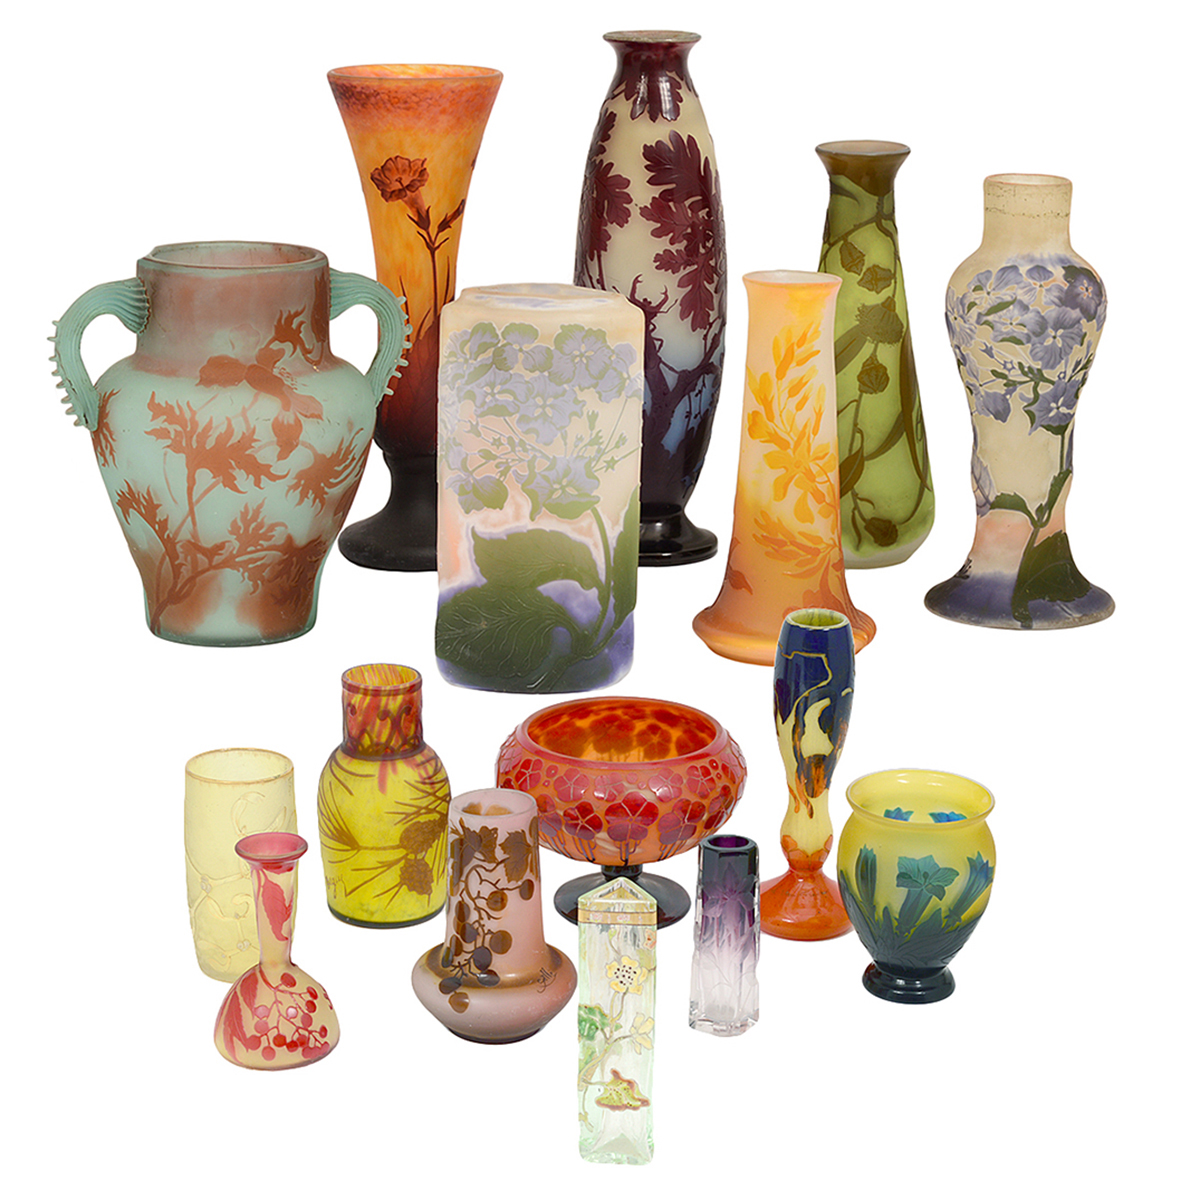 Examples from collection of French cameo and other Art Deco glass to be offered in April 27-28 auction in West Palm Beach, Florida. Auction Gallery of the Palm Beaches image